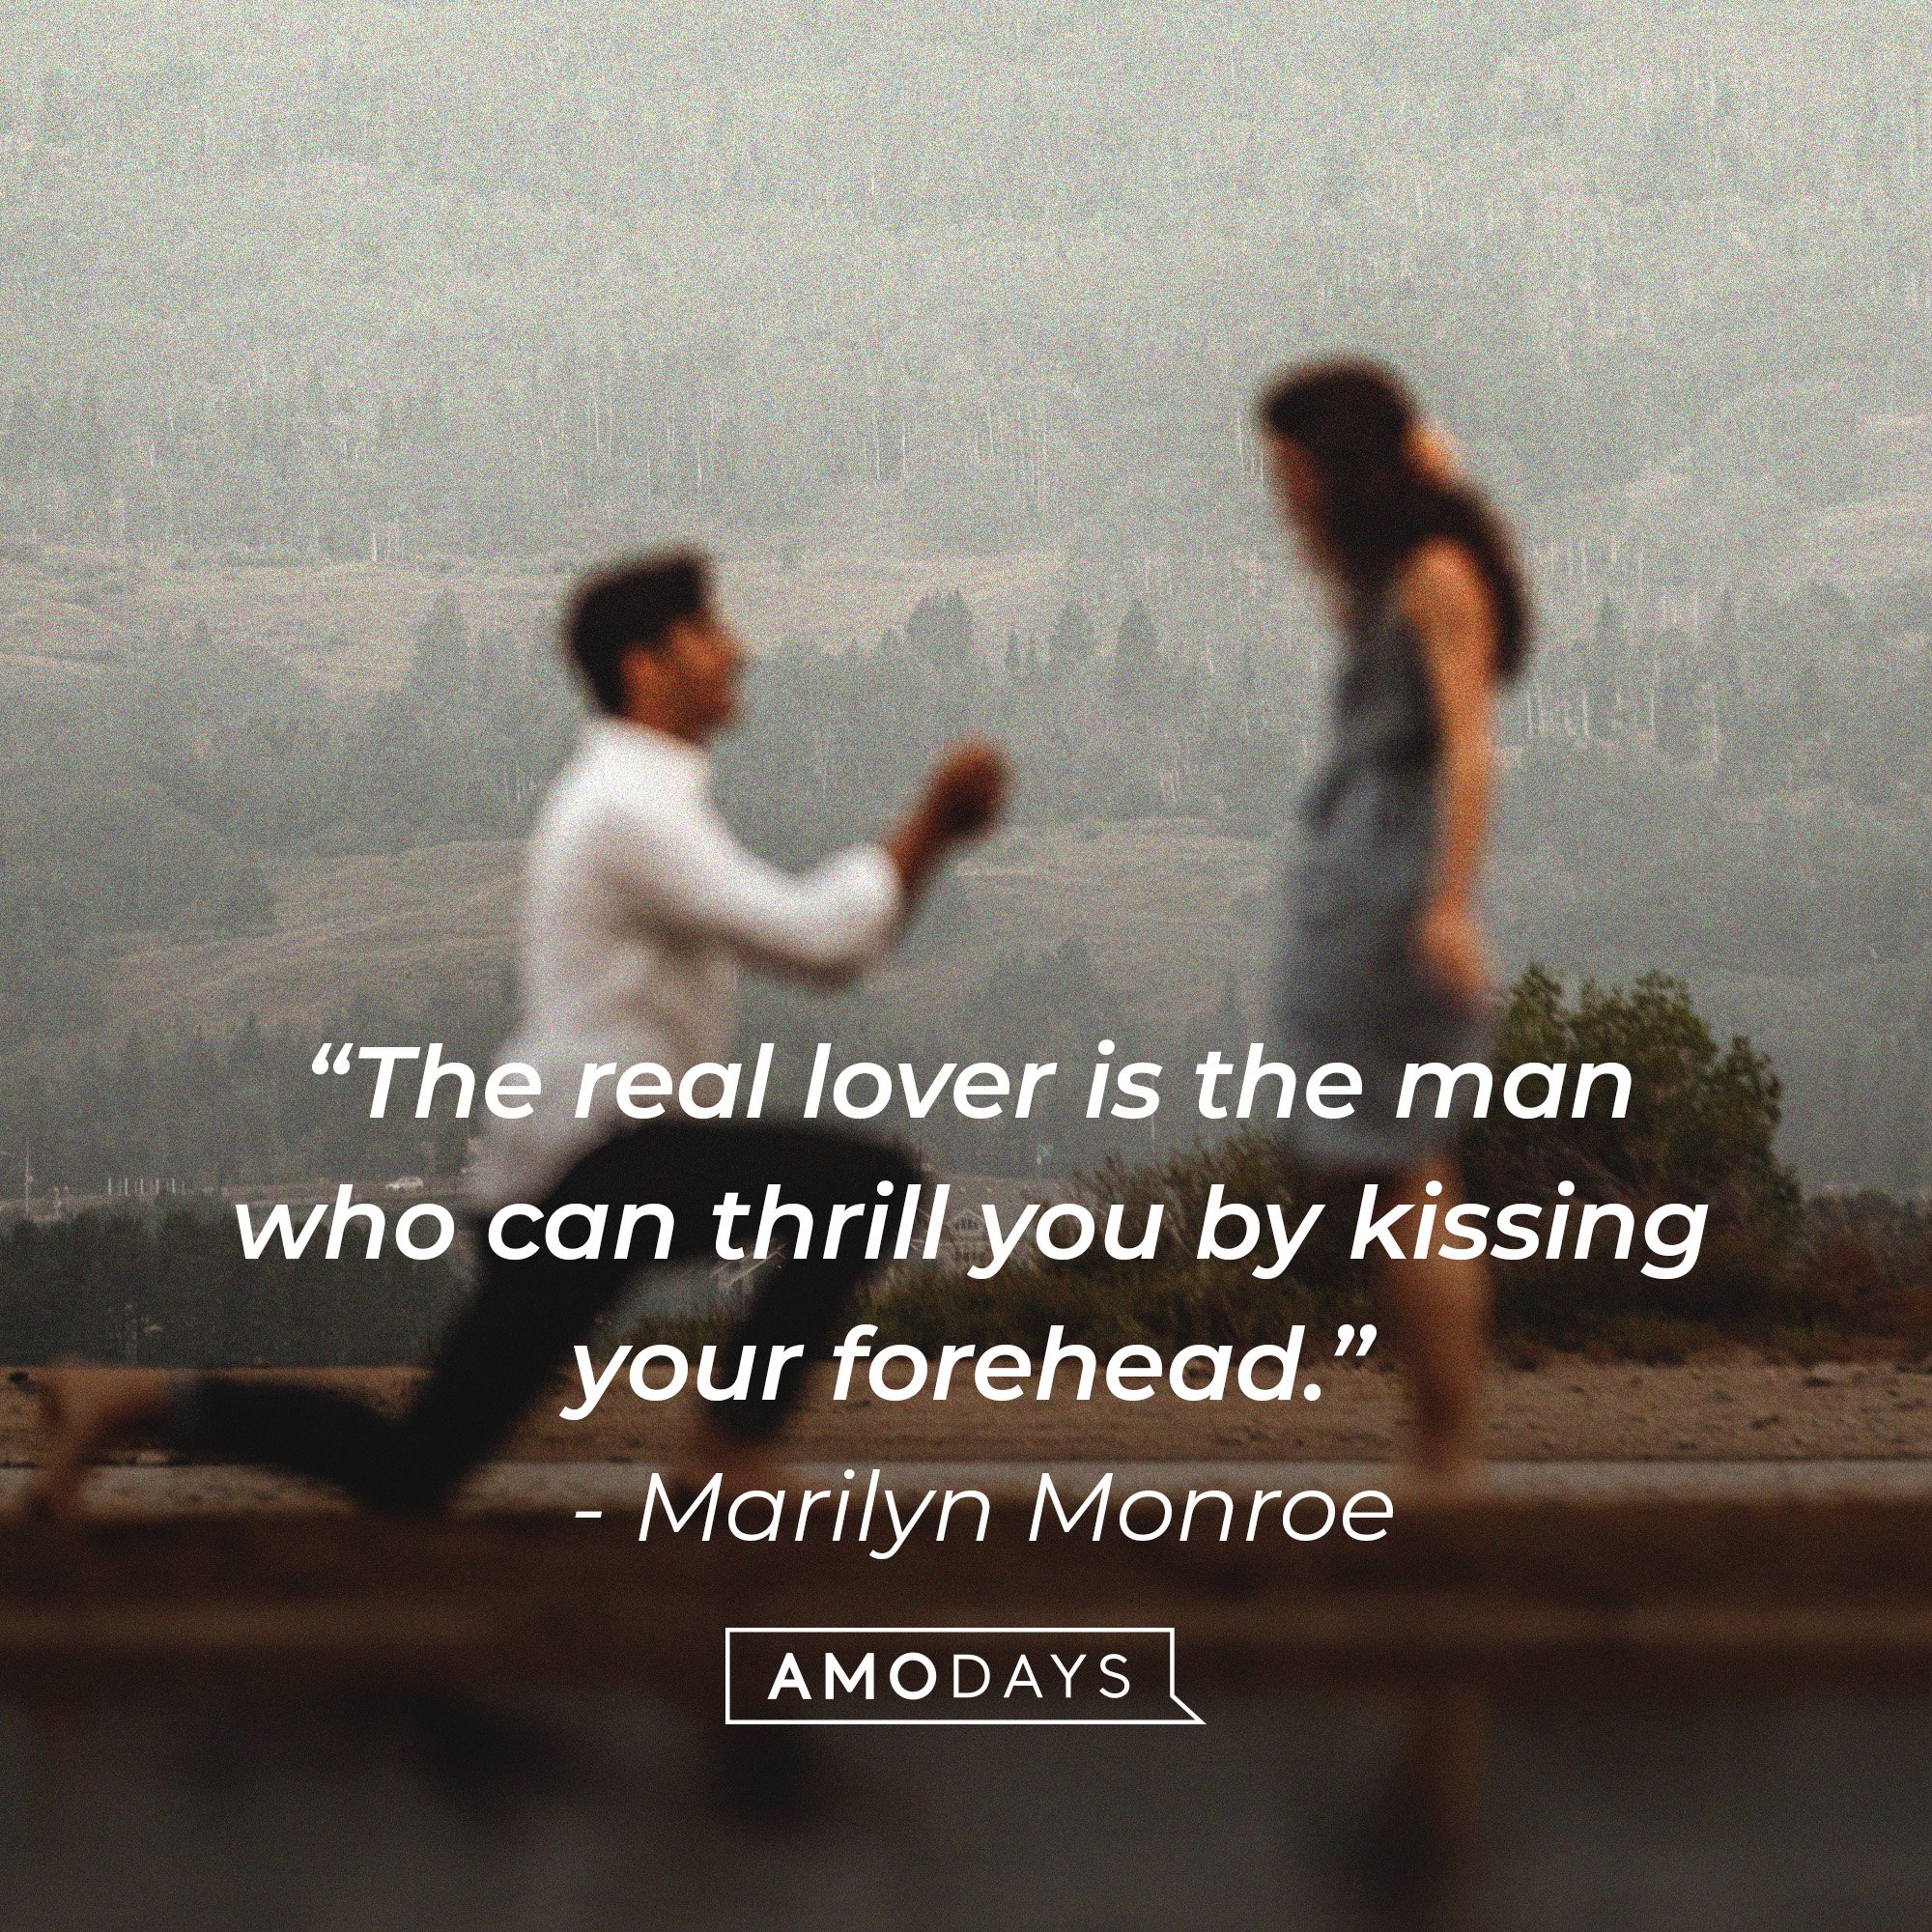 Marilyn Monroe's quote:  “The real lover is the man who can thrill you by kissing your forehead.” | Image: AmoDays